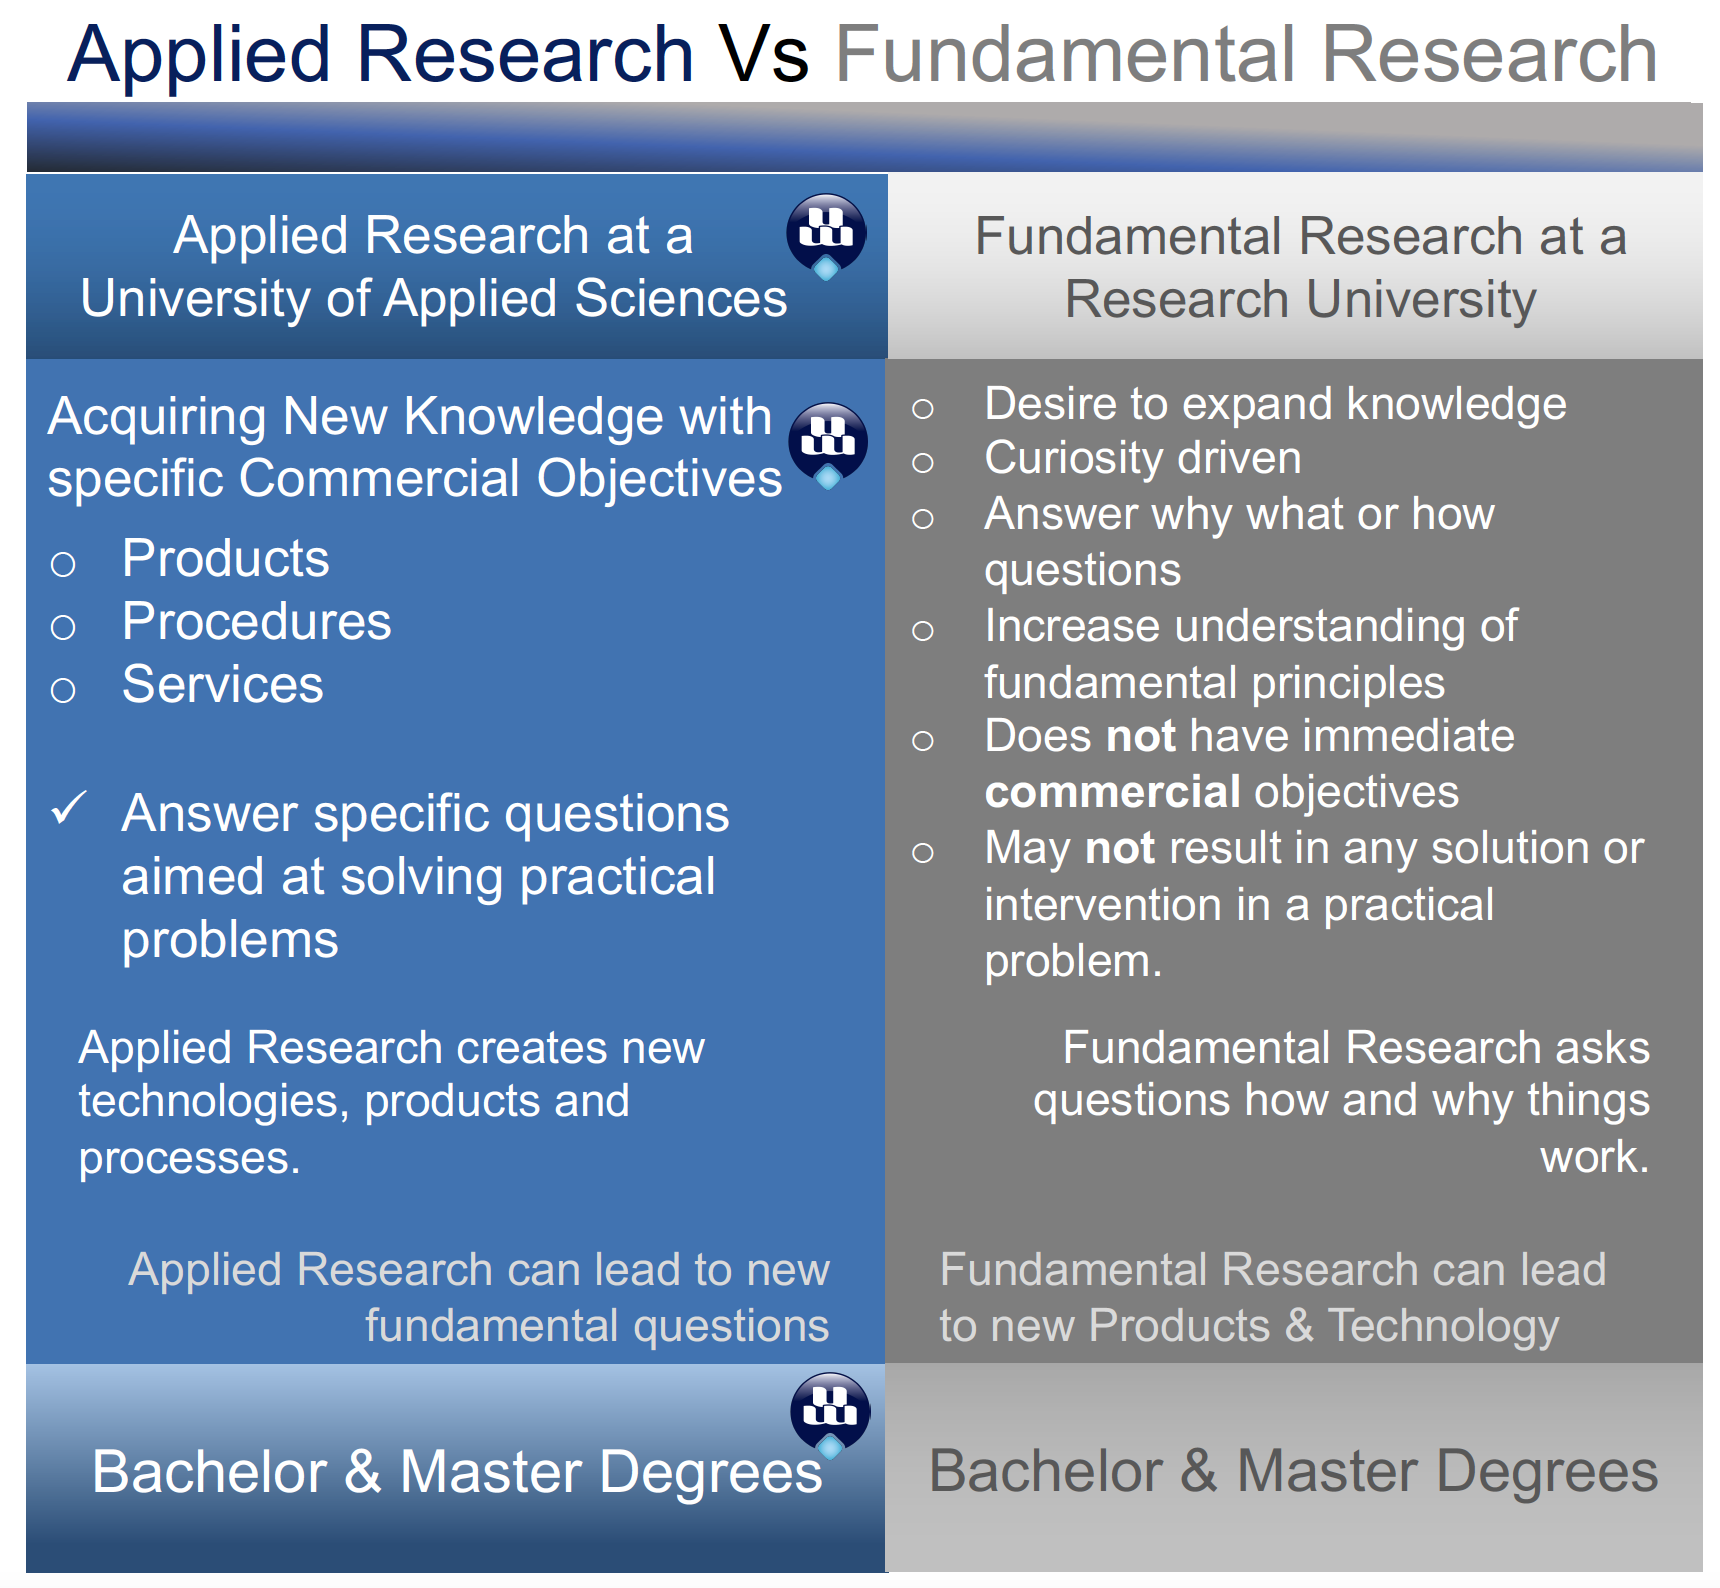 Applied Research versus Fundamental Research